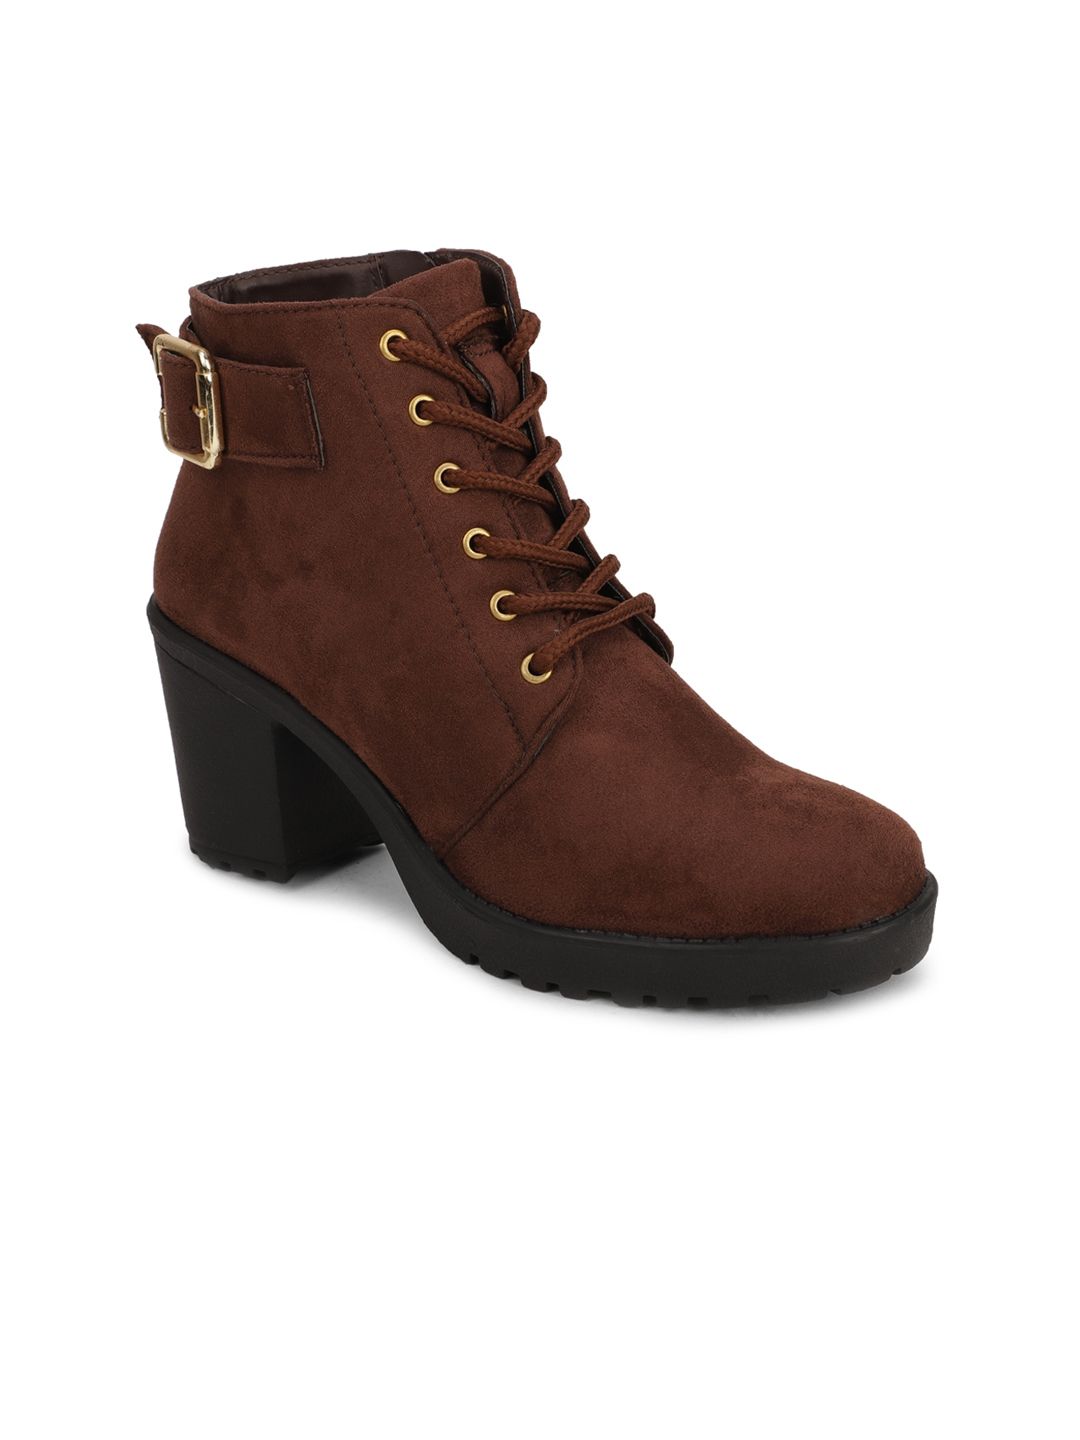 Bruno Manetti Brown Suede Block Heeled Boots with Buckles Price in India